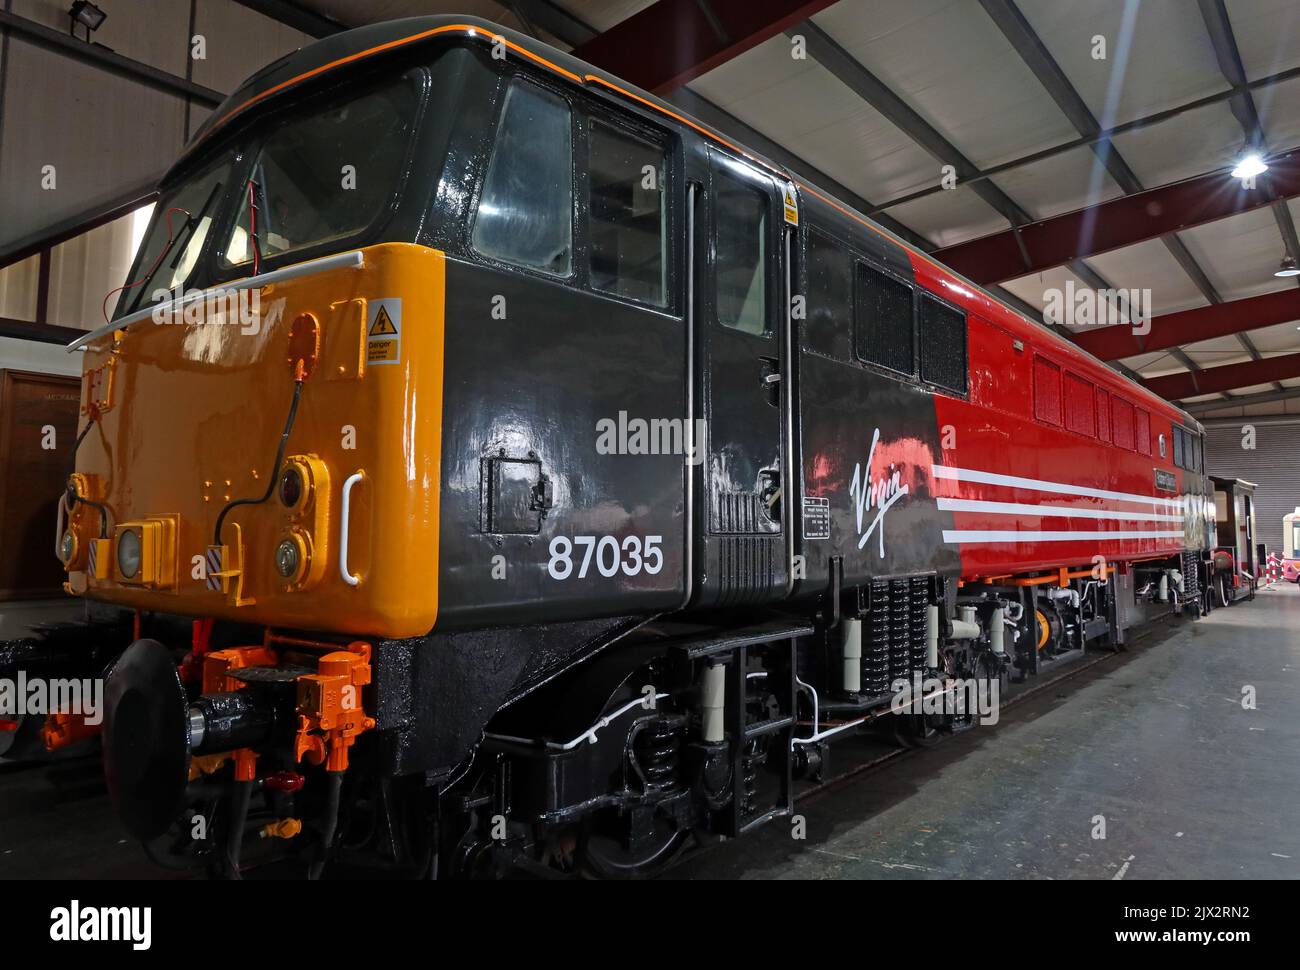 Virgin Trains livery unveiled on Class 87 electric locomotive at Crewe heritage centre - Power unit engine 87035, Cheshire, England, UK, CW1 2DB Stock Photo